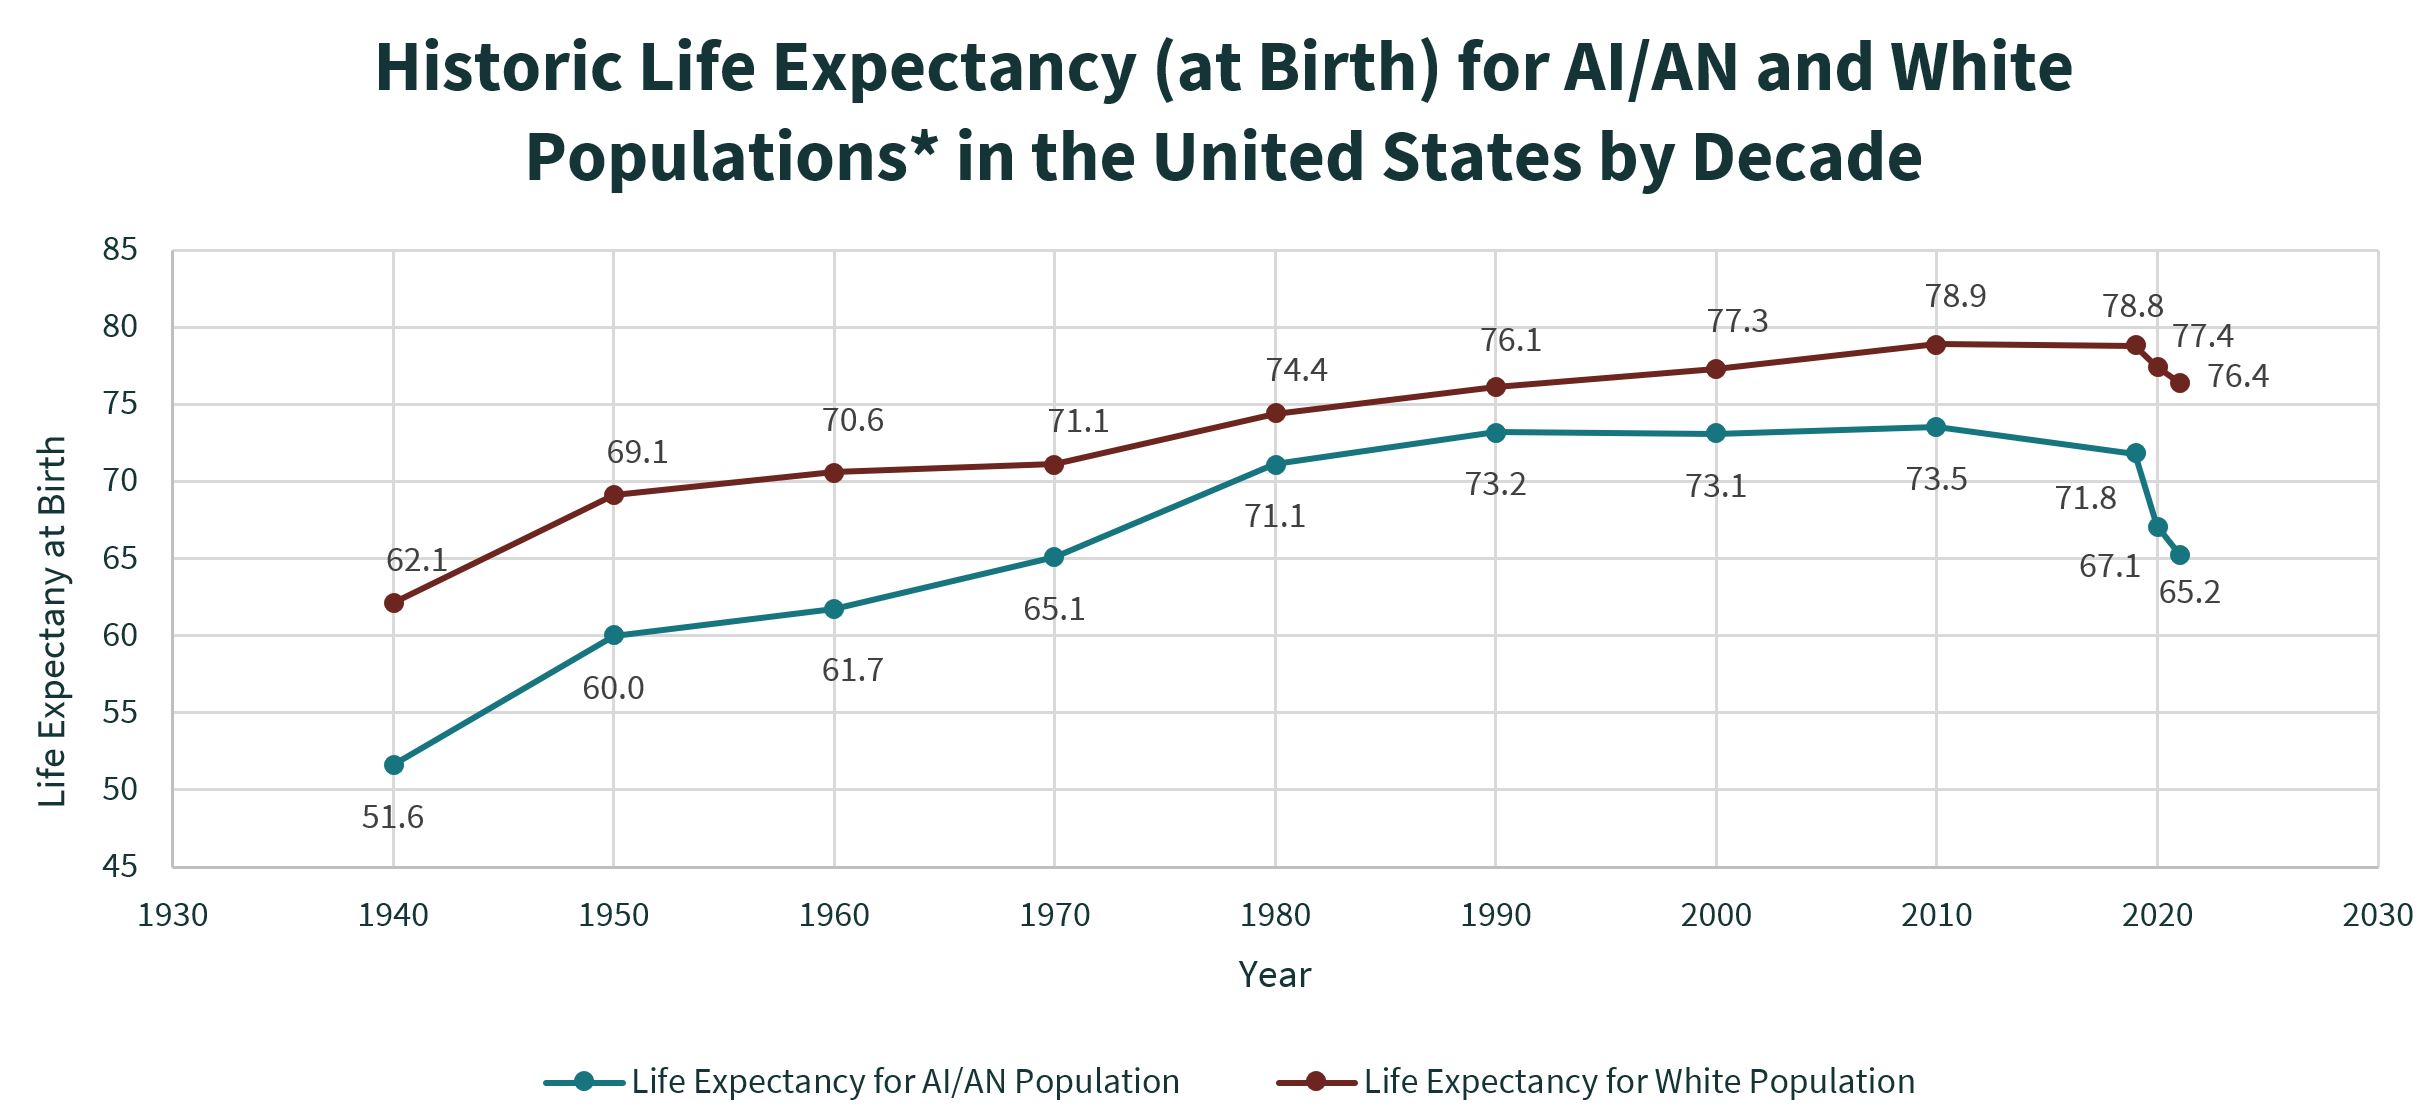 Chart: Historic Life Expectancy (at Birth) for AI/AN and White Populations* in the United States by Decade